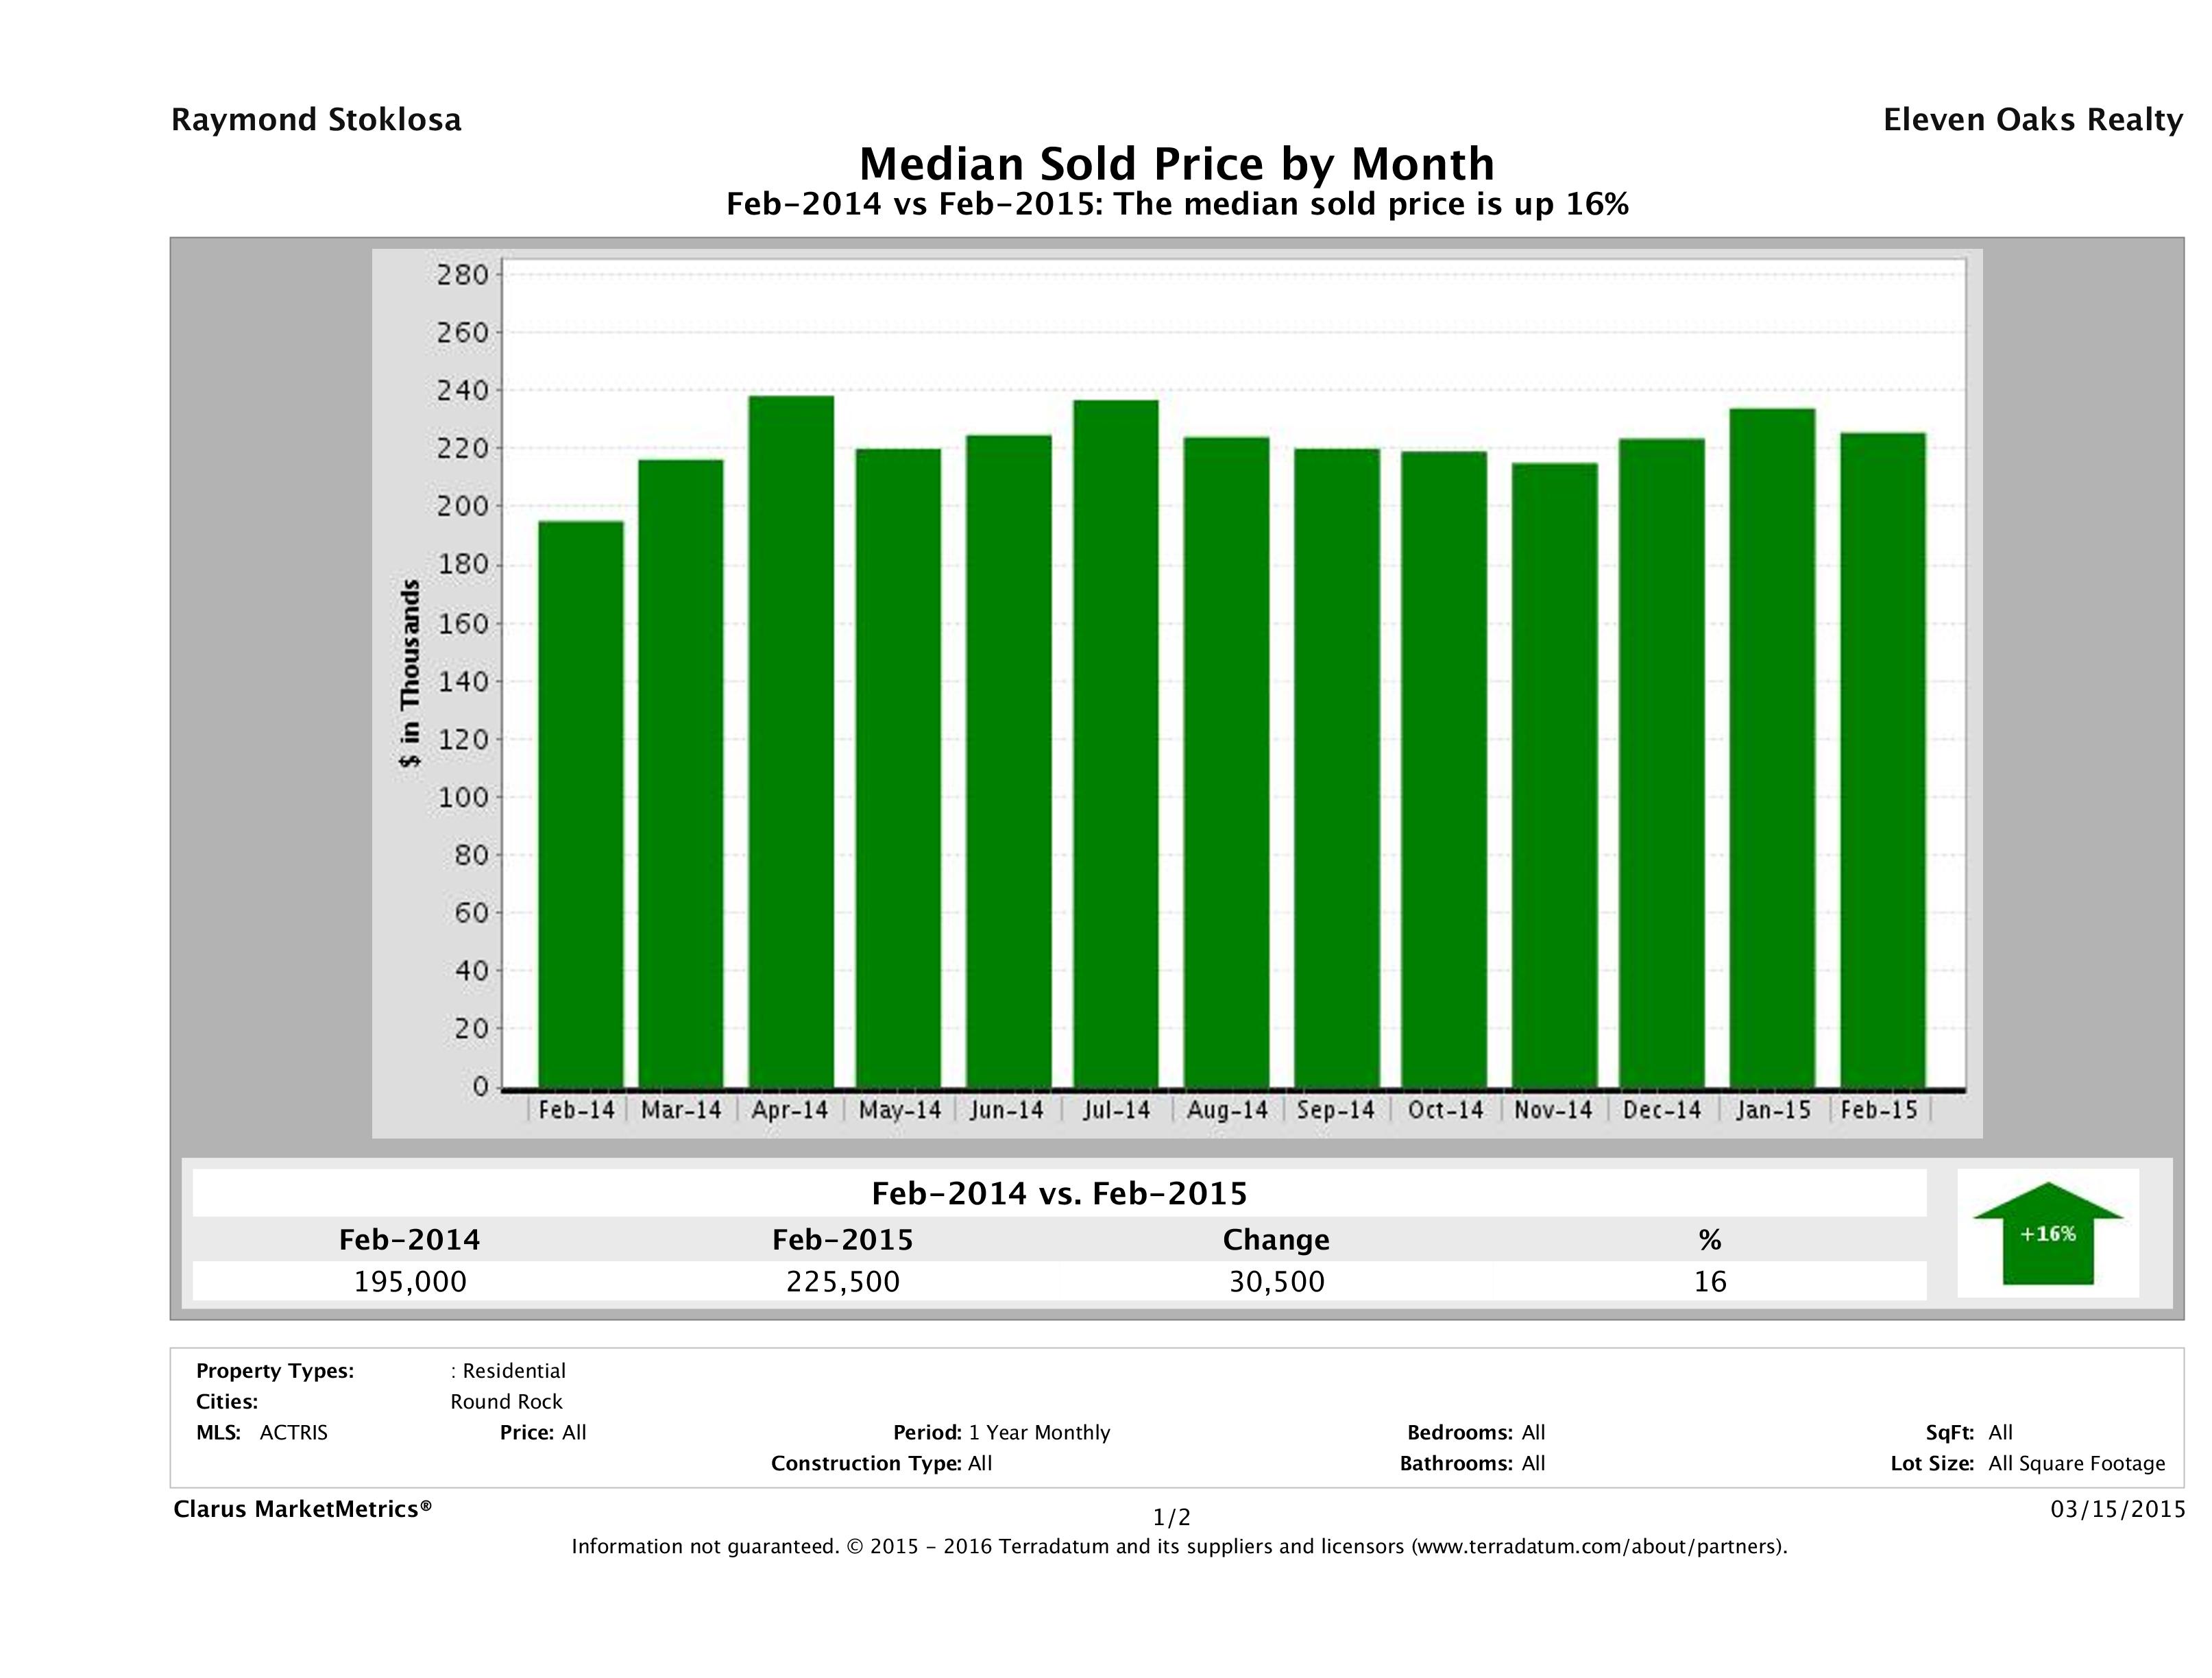 Round Rock median home price February 2015